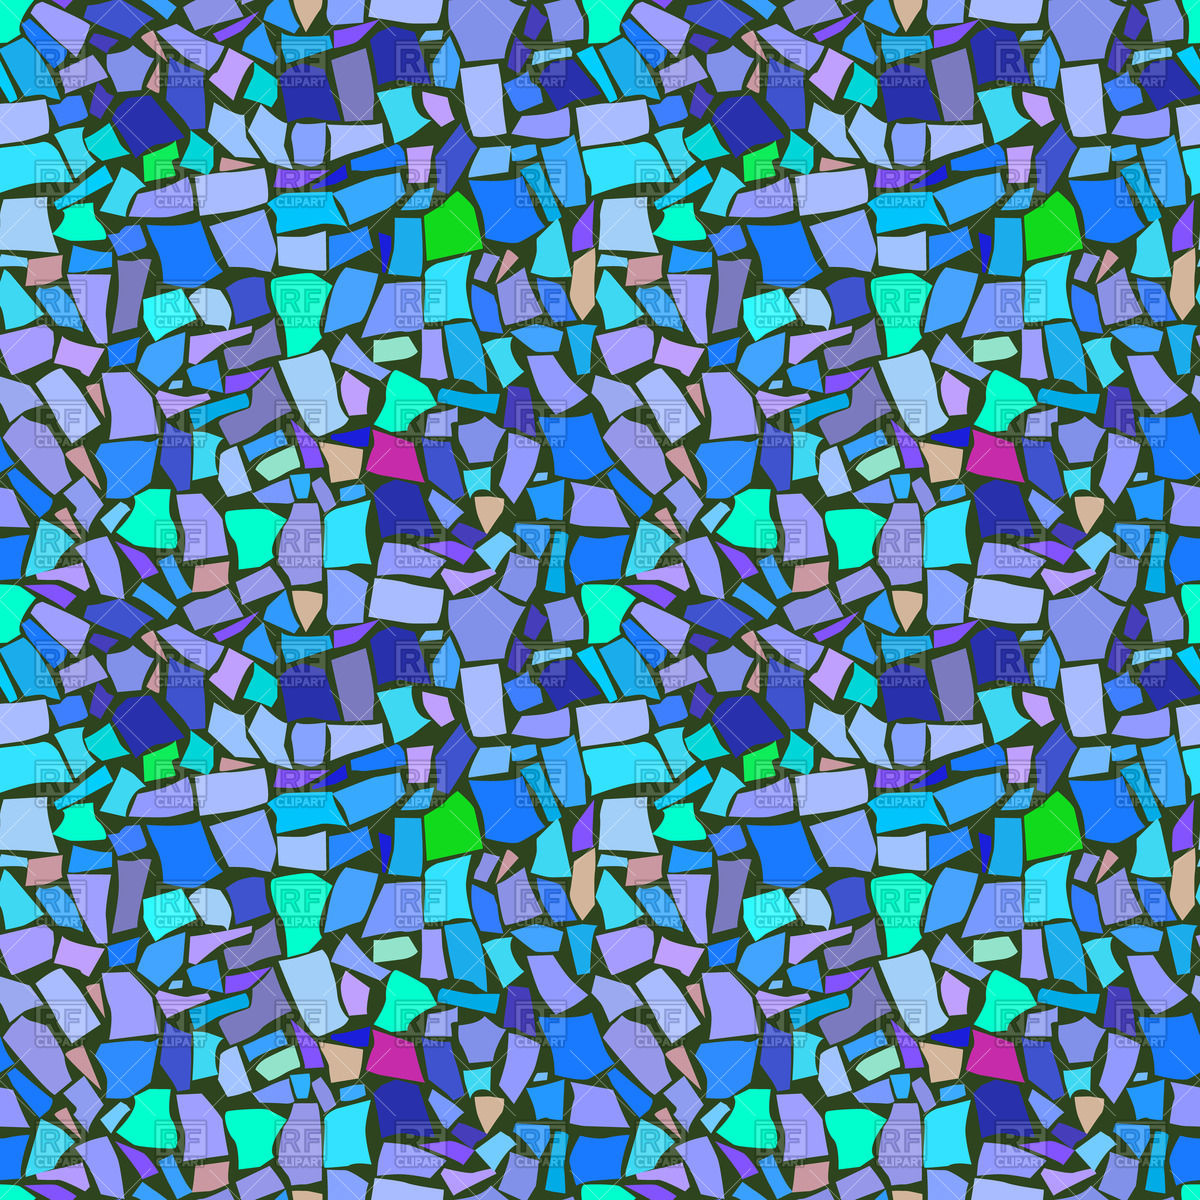 Mosaic Vector At Collection Of Mosaic Vector Free For